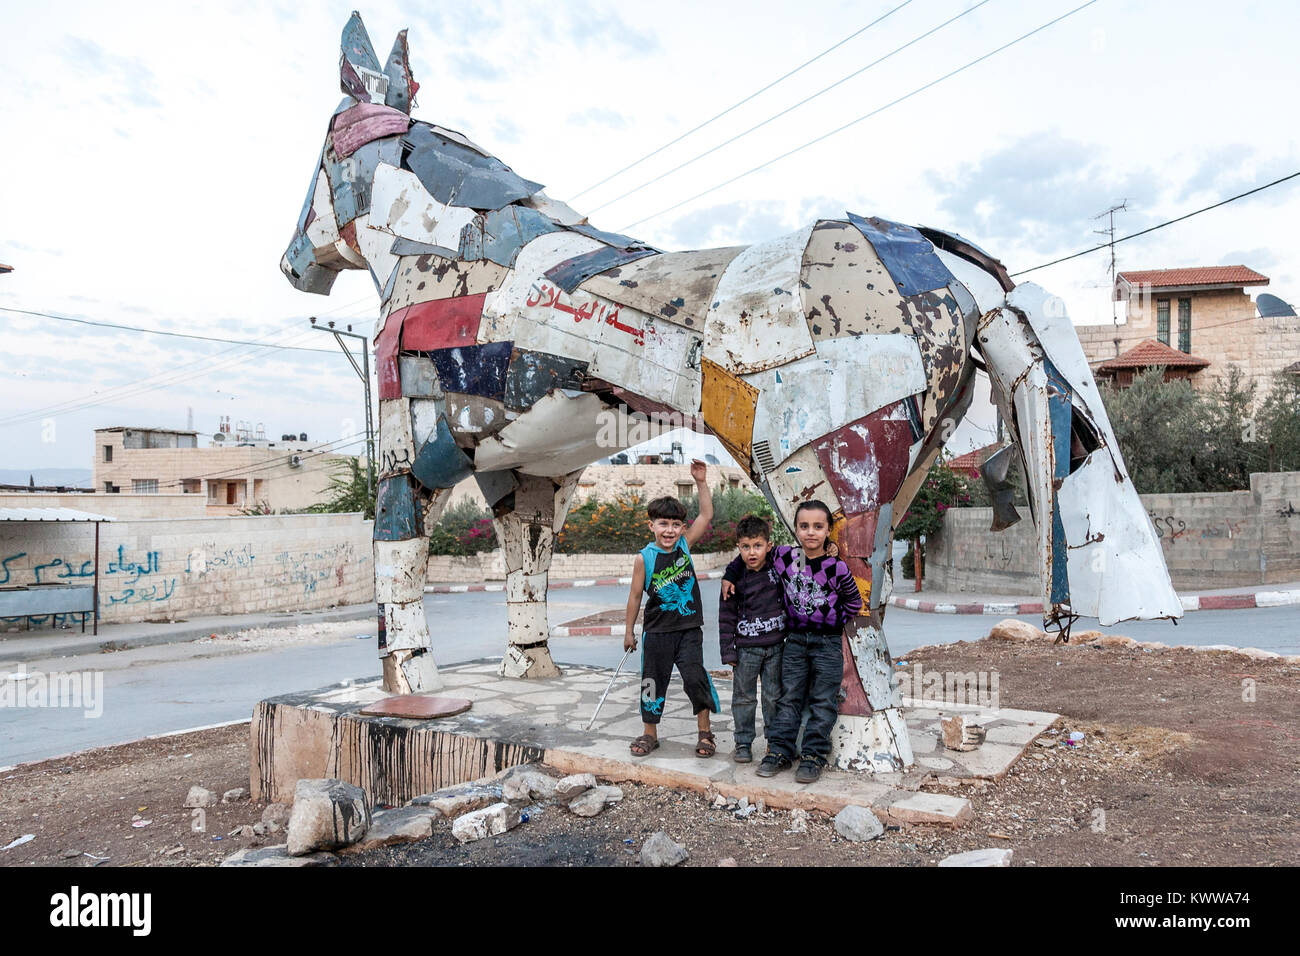 Jenin, Palestine, November 18, 2010: Palestinian children are standing in front of a horse built by German artist from car scrap metal crushed by Isra Stock Photo